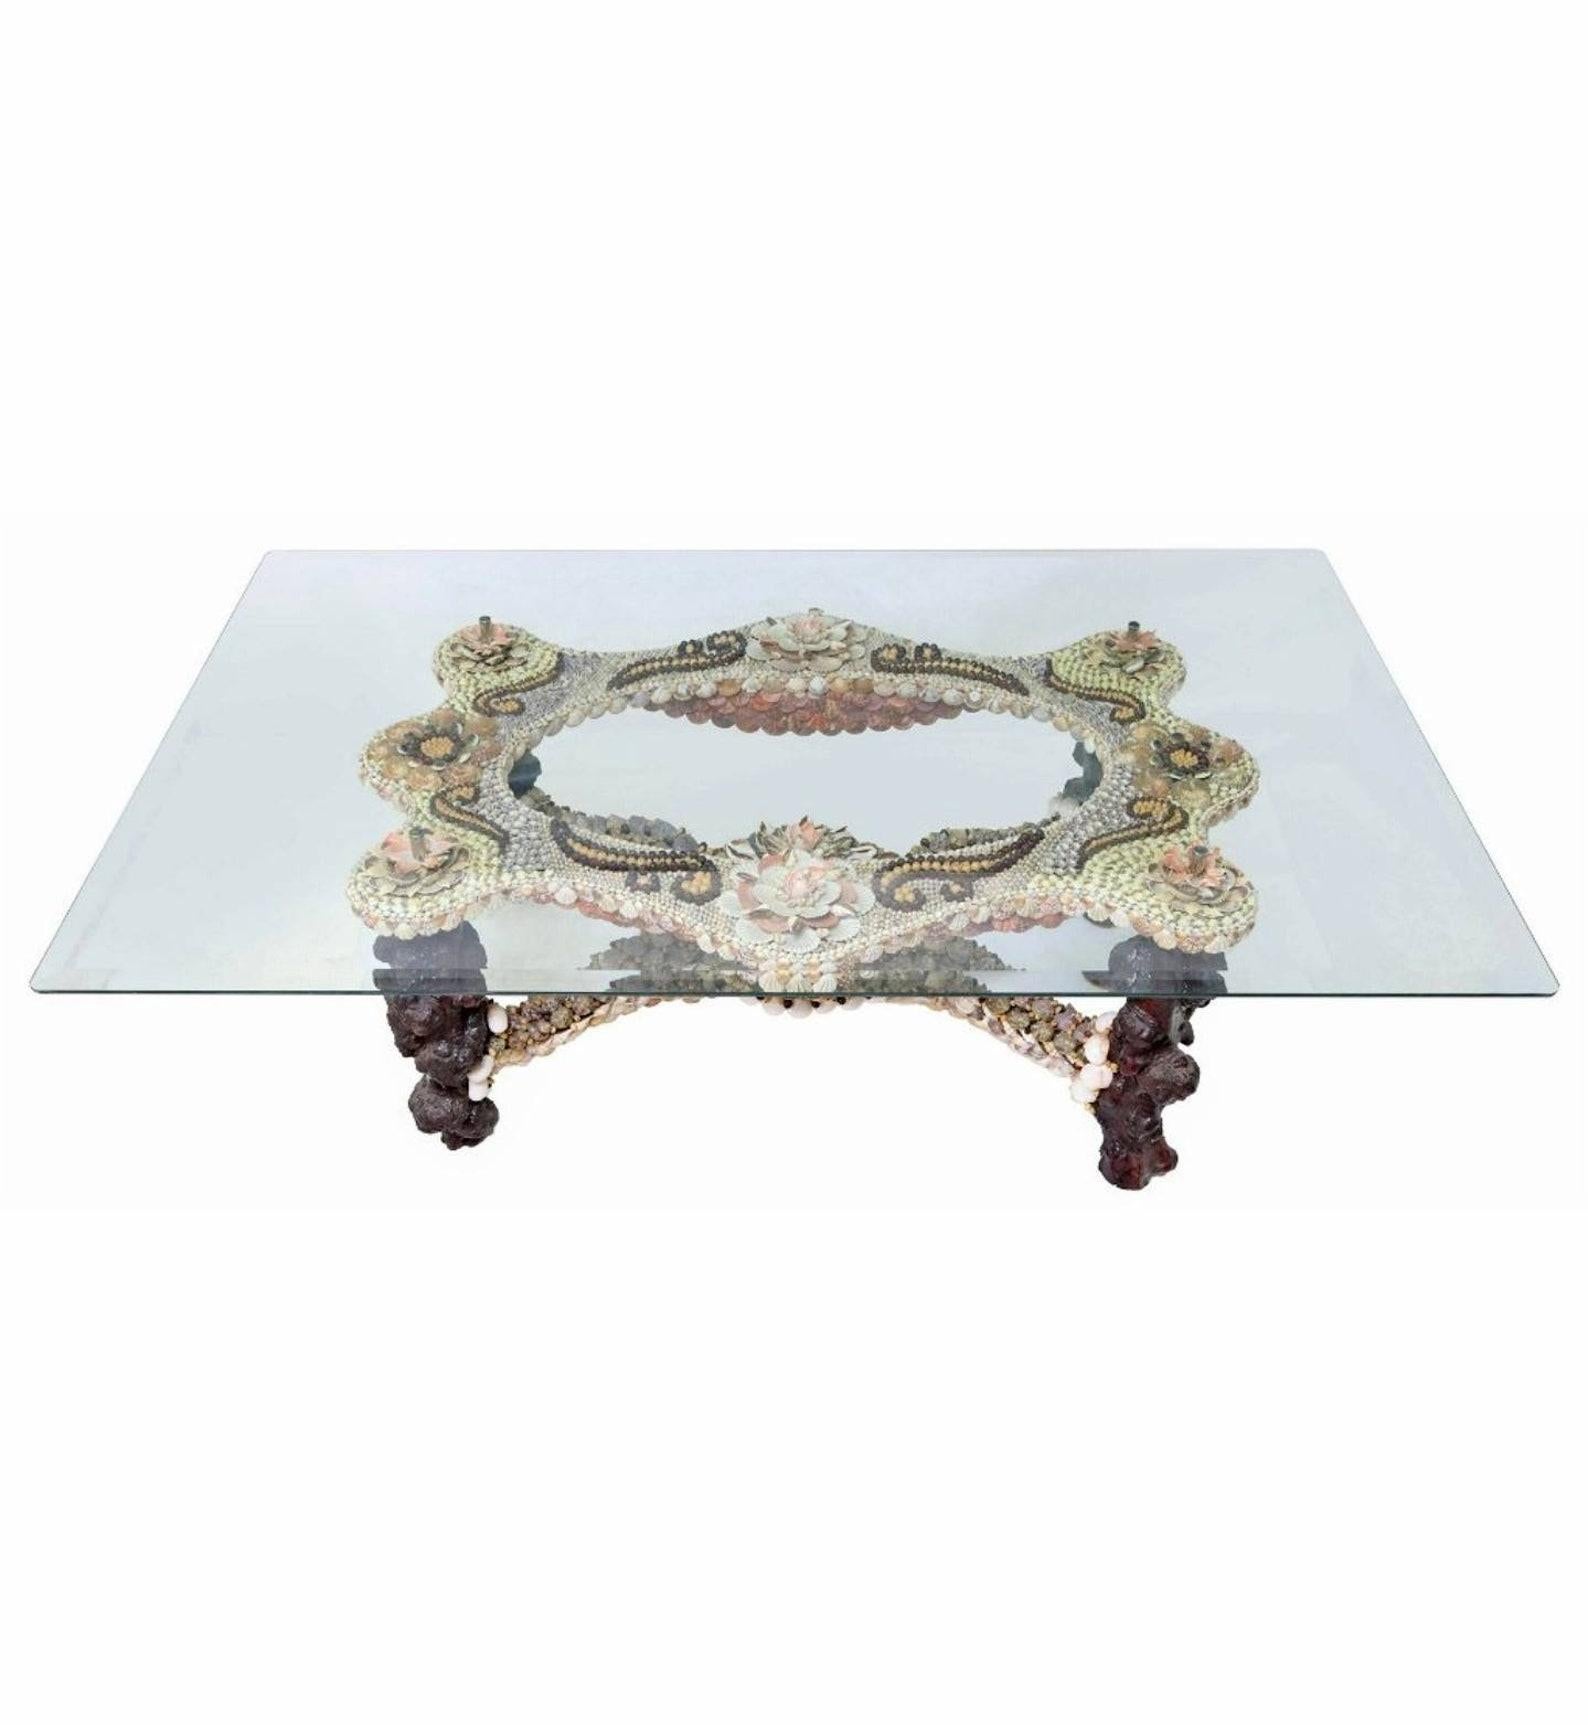 Folk Art Vintage Anthony Redmile Grotto Style Shellwork Decorated Glass Top Table For Sale